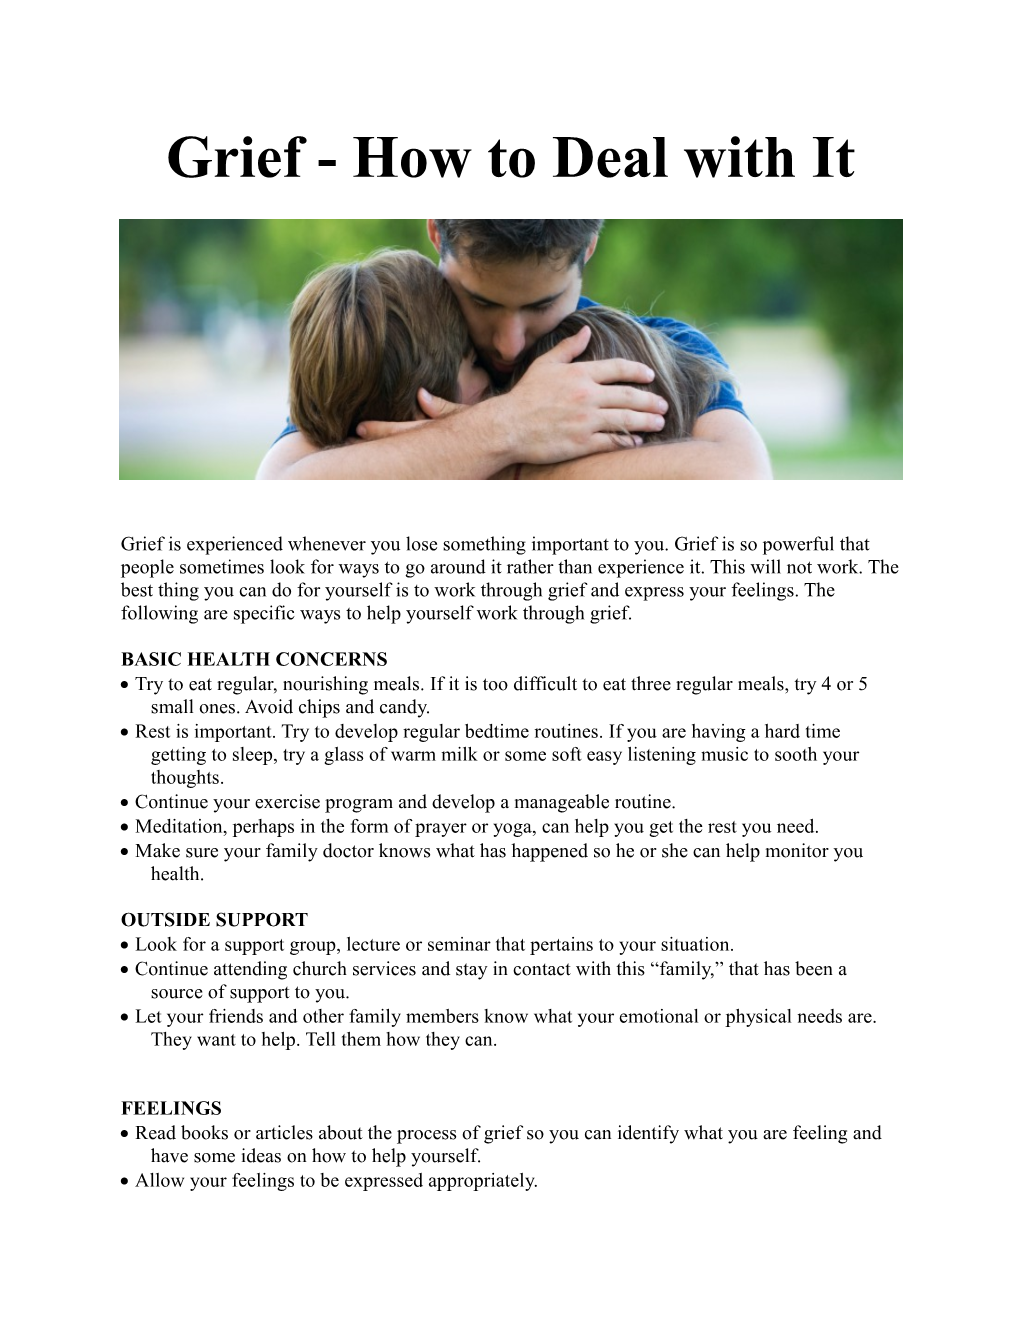 Grief - How to Deal with It